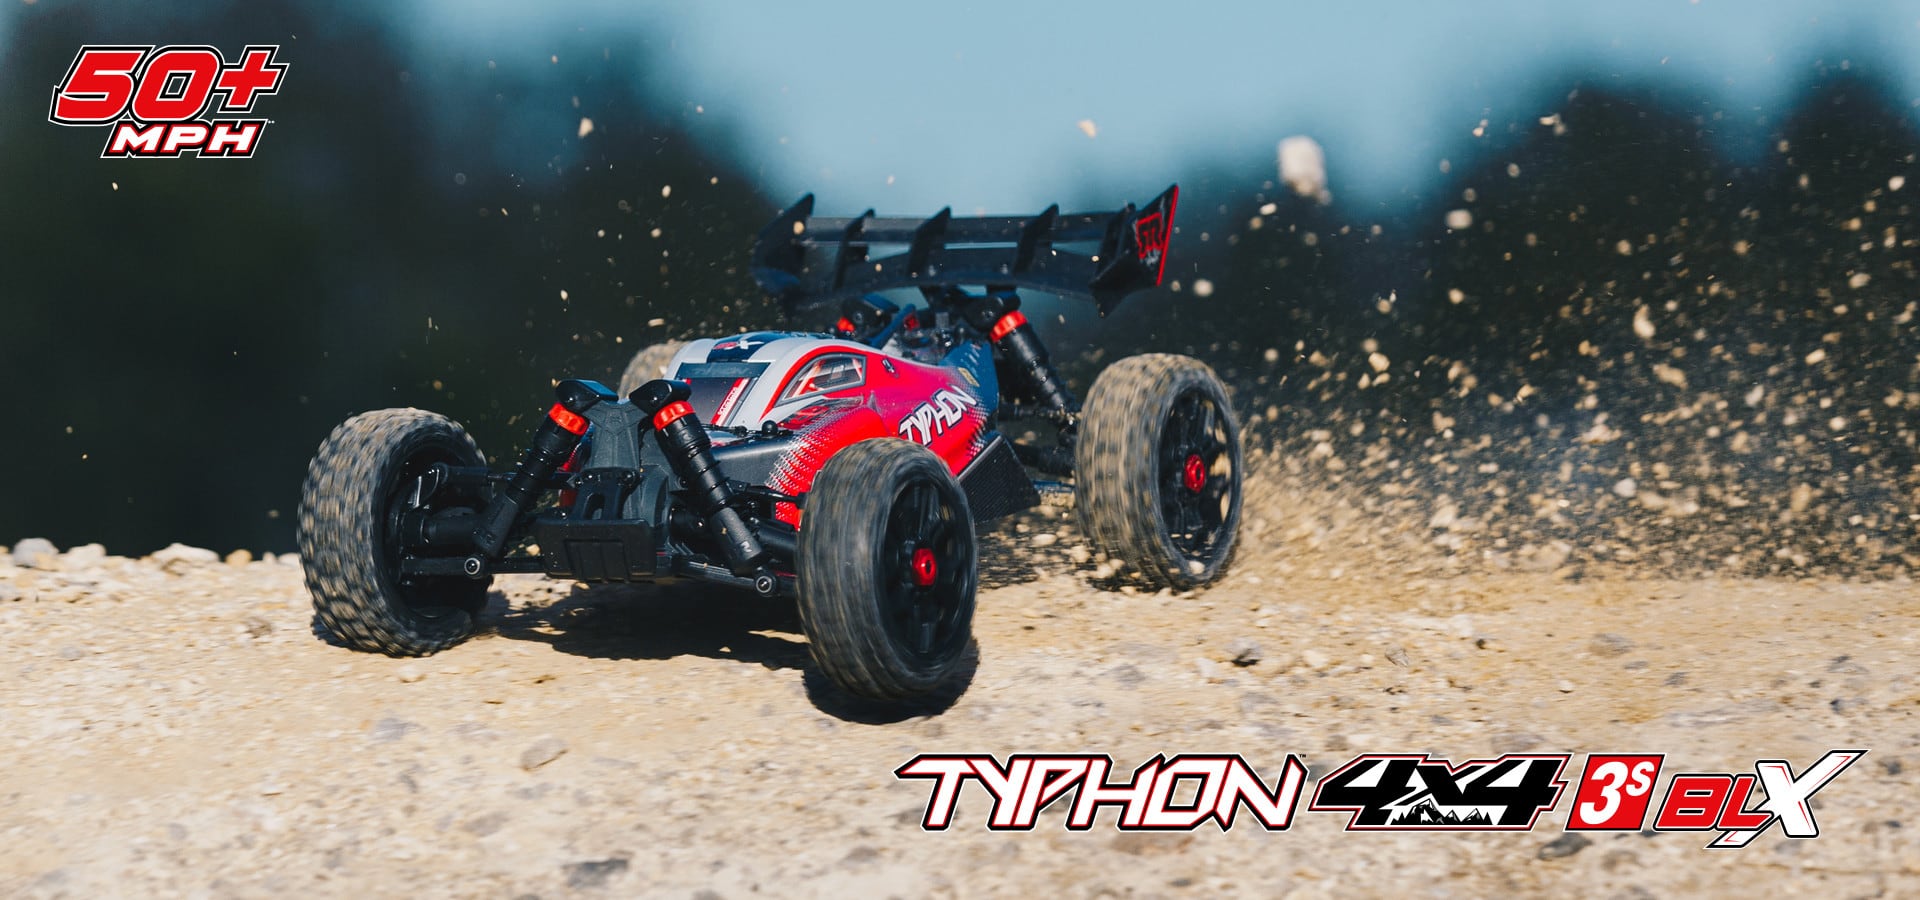 ARRMA Typhon 4x4 3S BLX Buggy - Outdoor Action